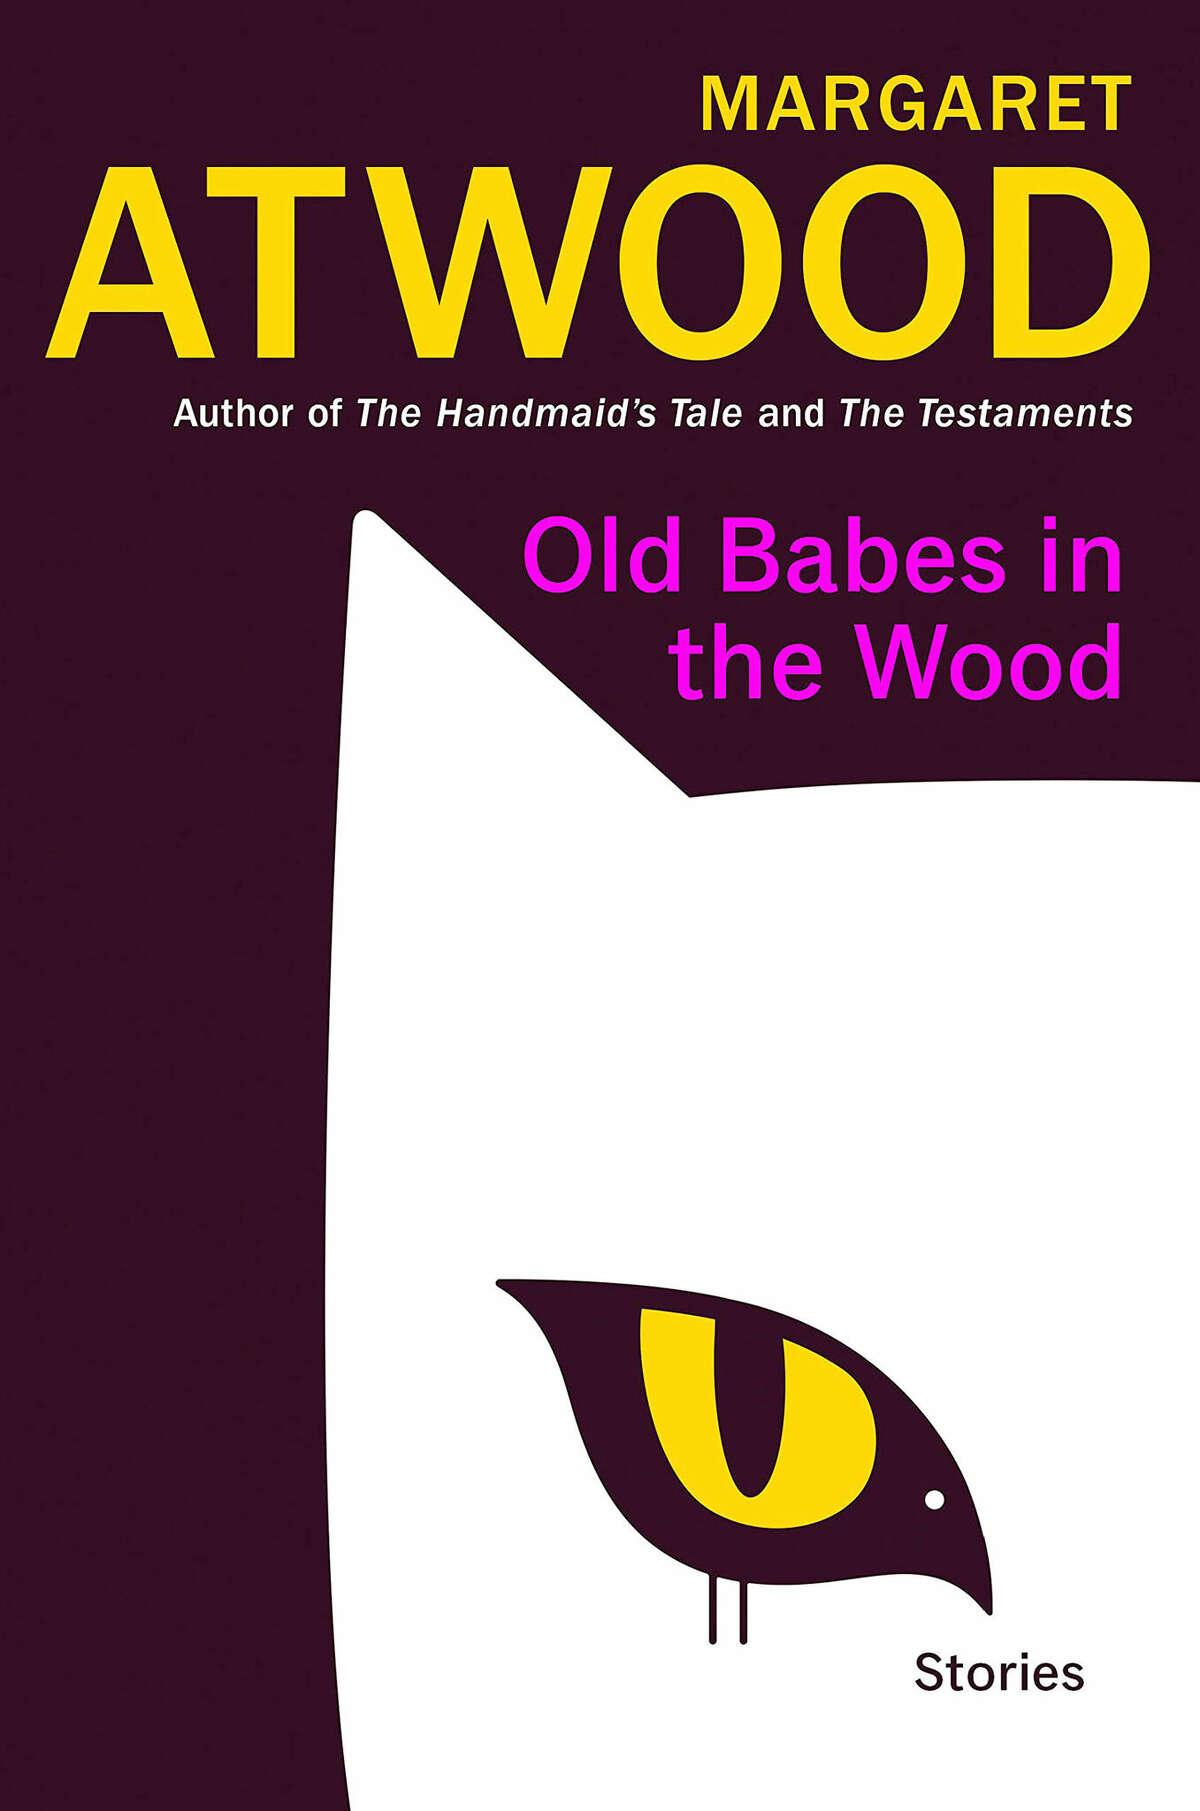 "Old Babes in the Wood"